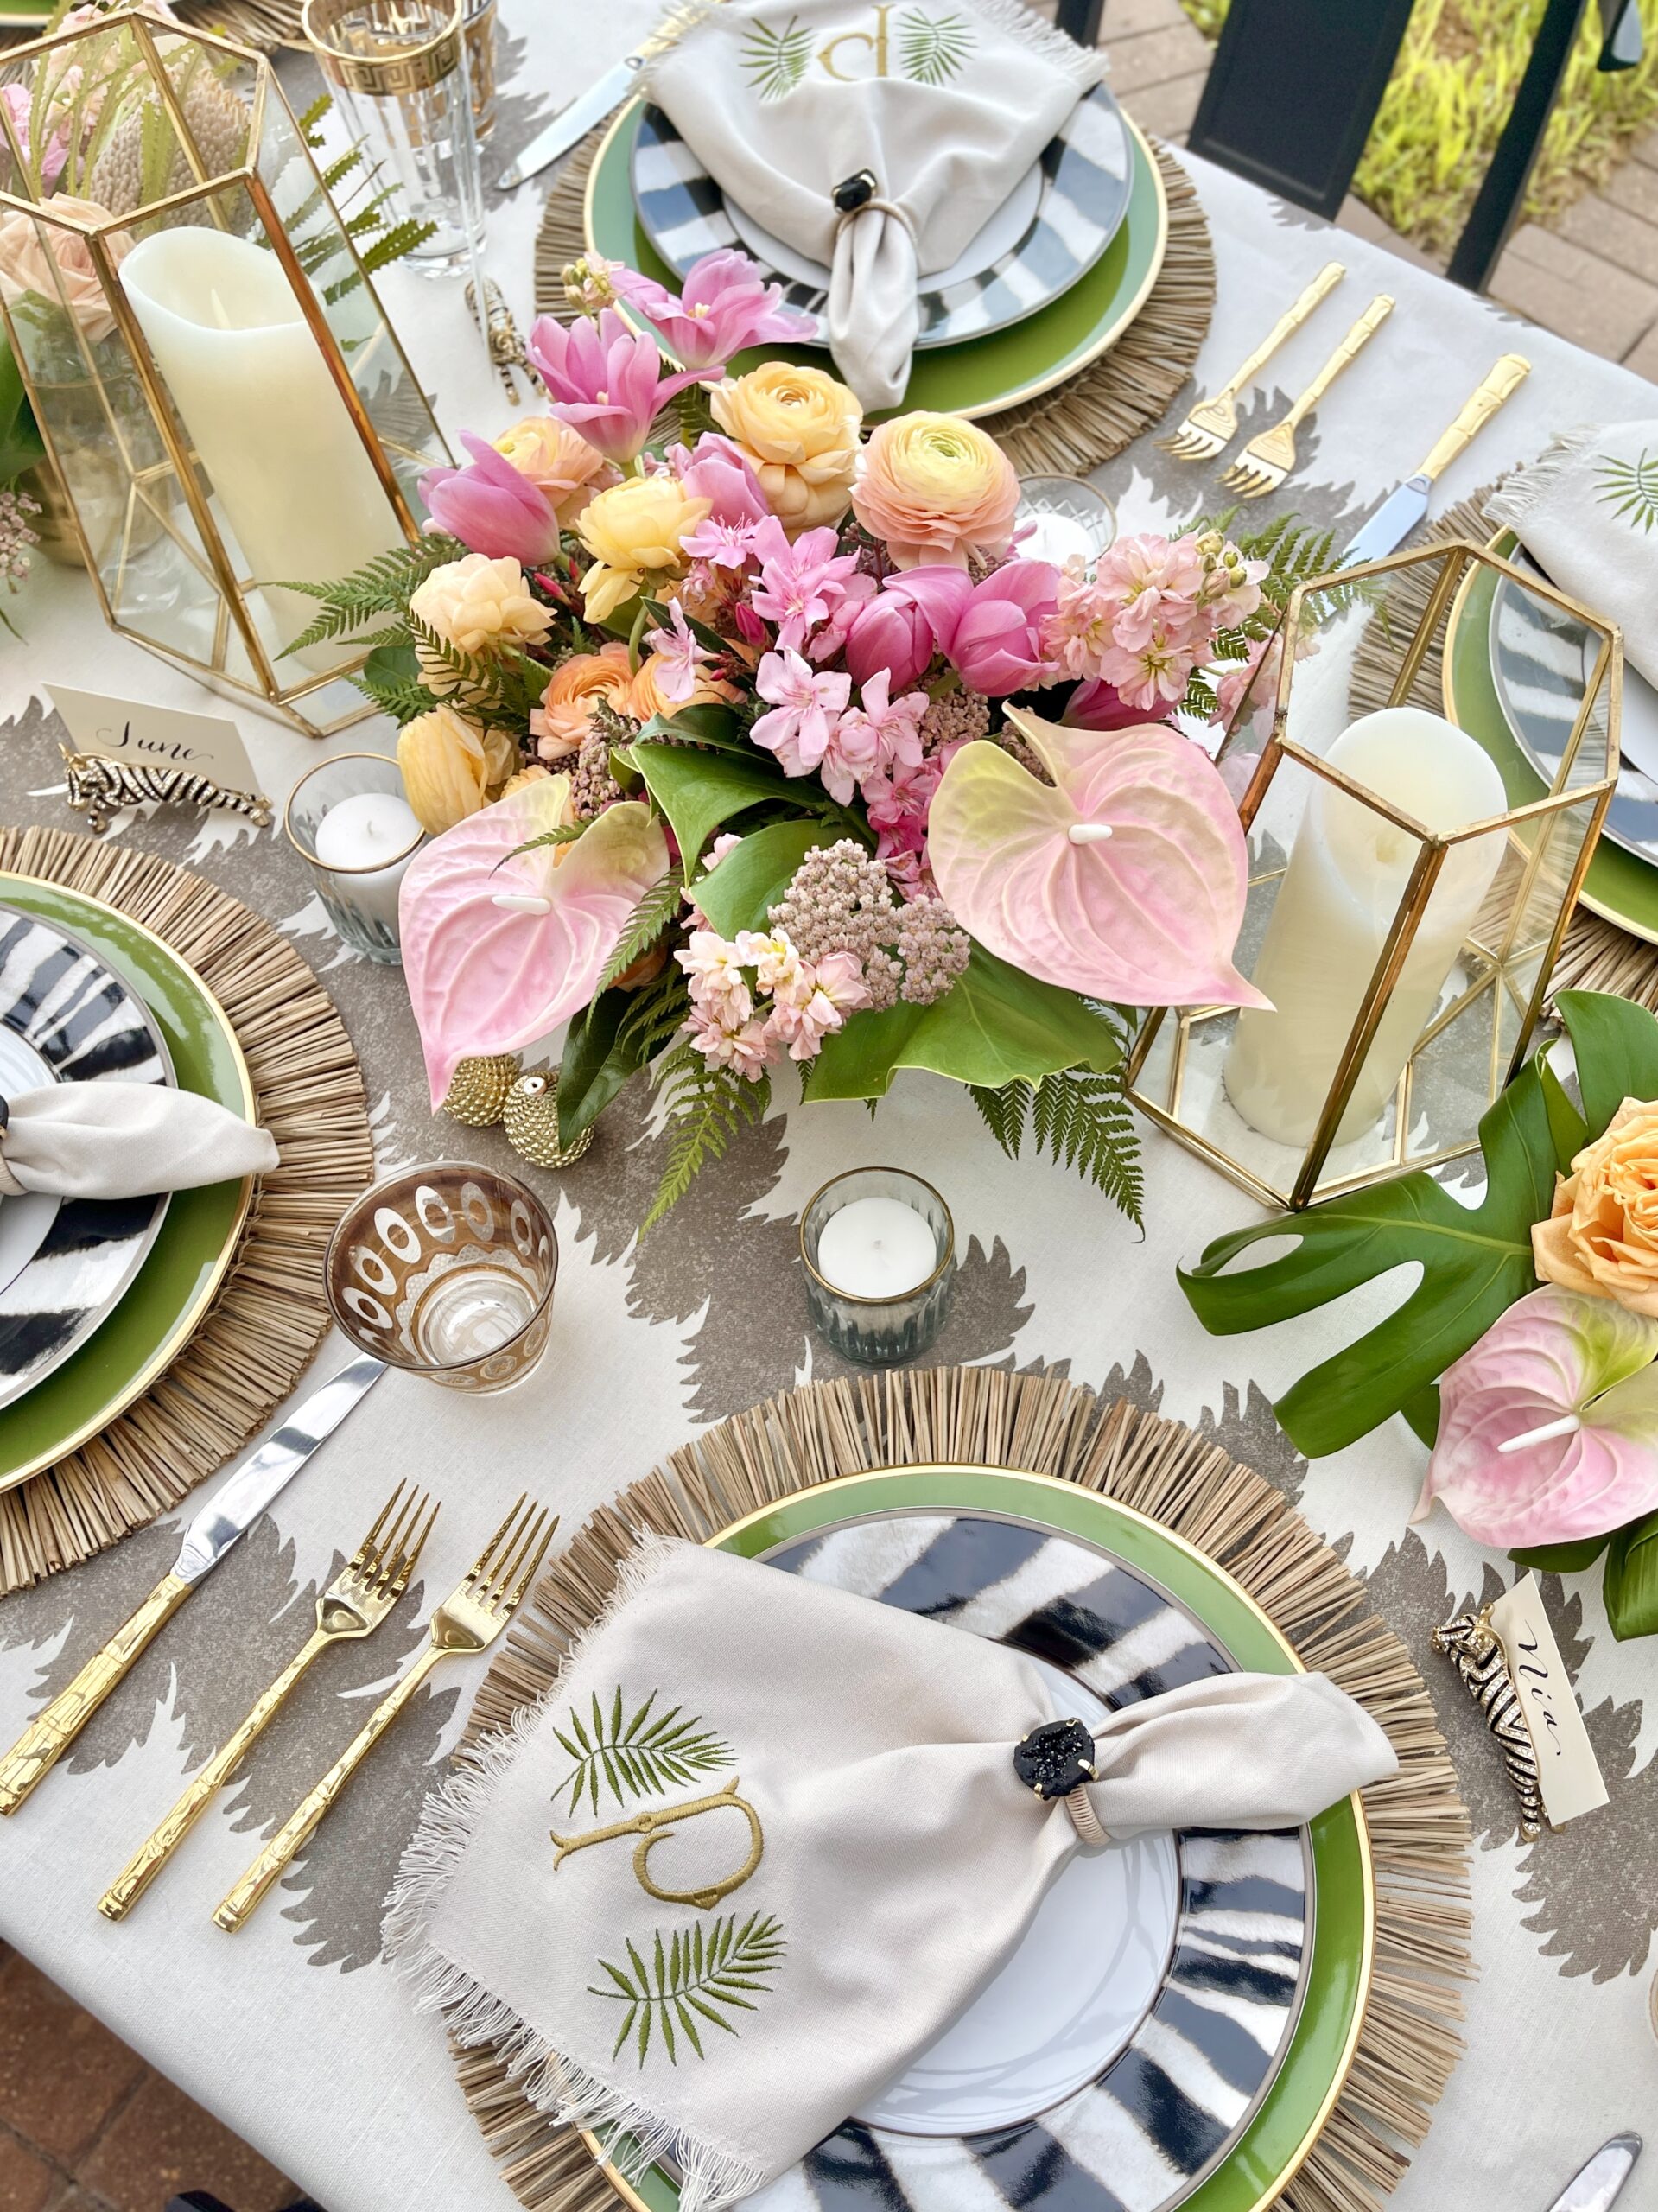 tropical safari table setting inspiration with pastel colors